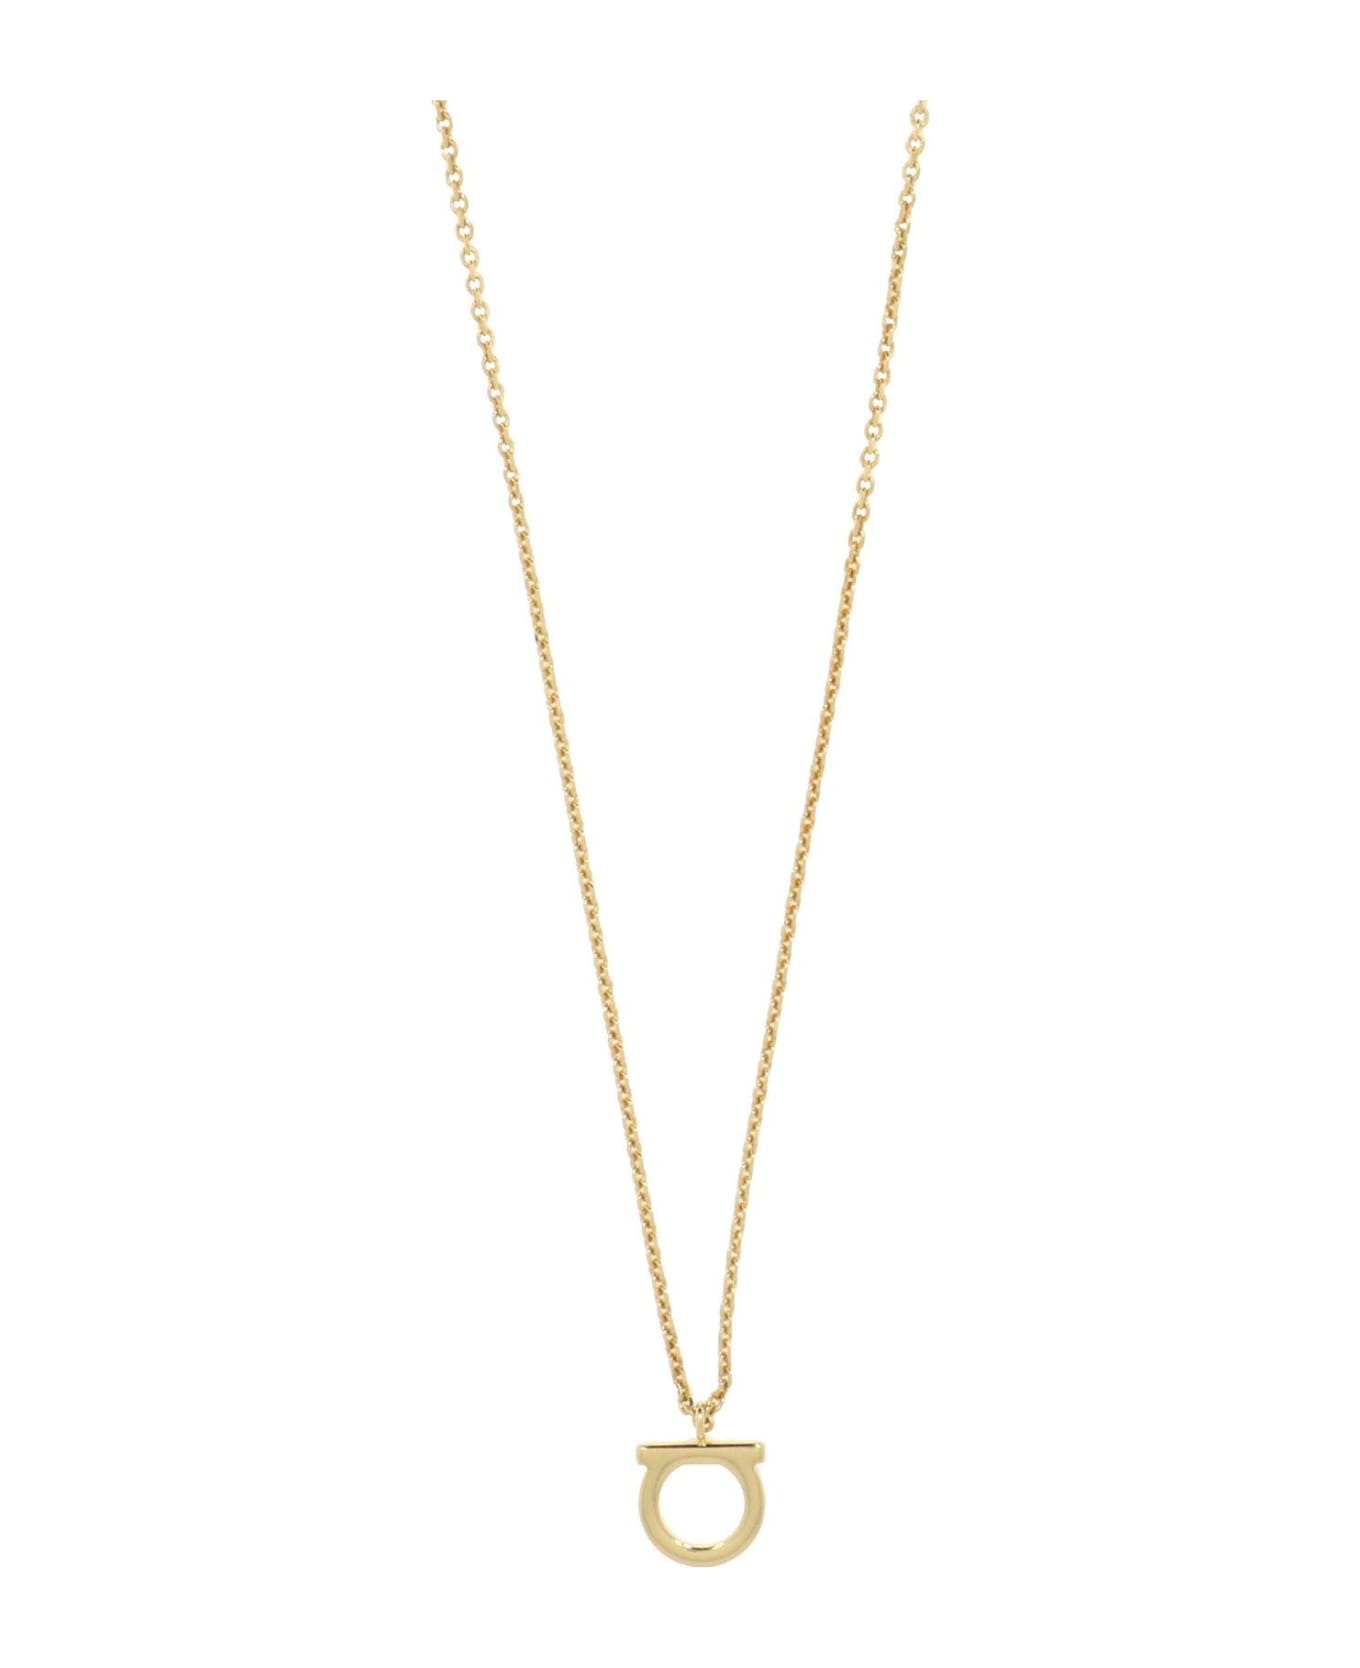 Ferragamo Gancini Chained Necklace - Golden ネックレス